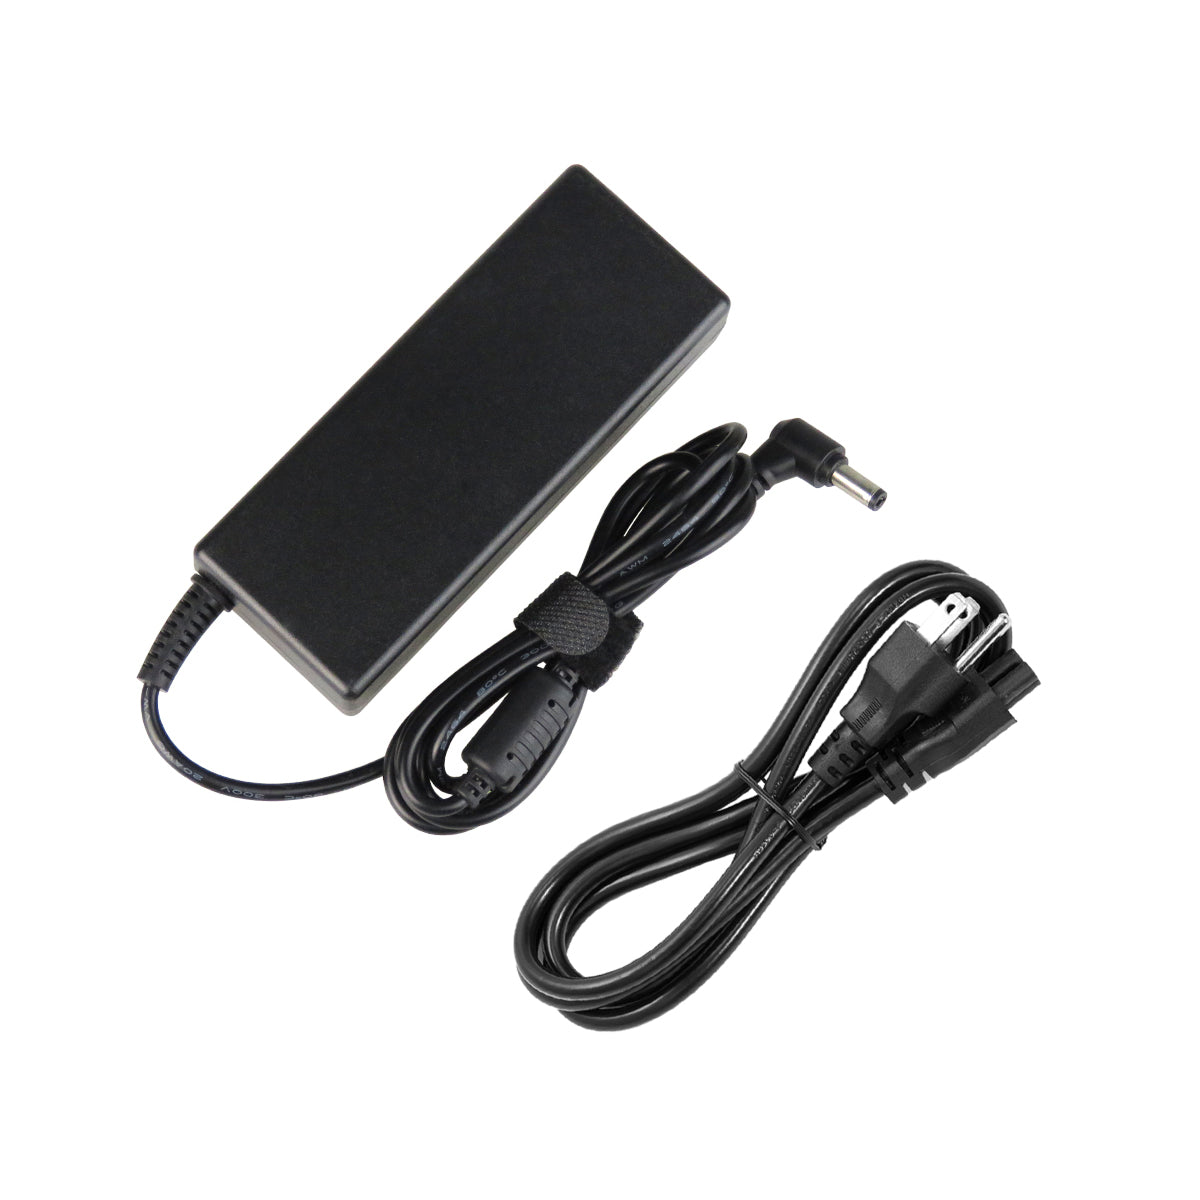 AC Adapter Charger for Gateway MX8730 Notebook.